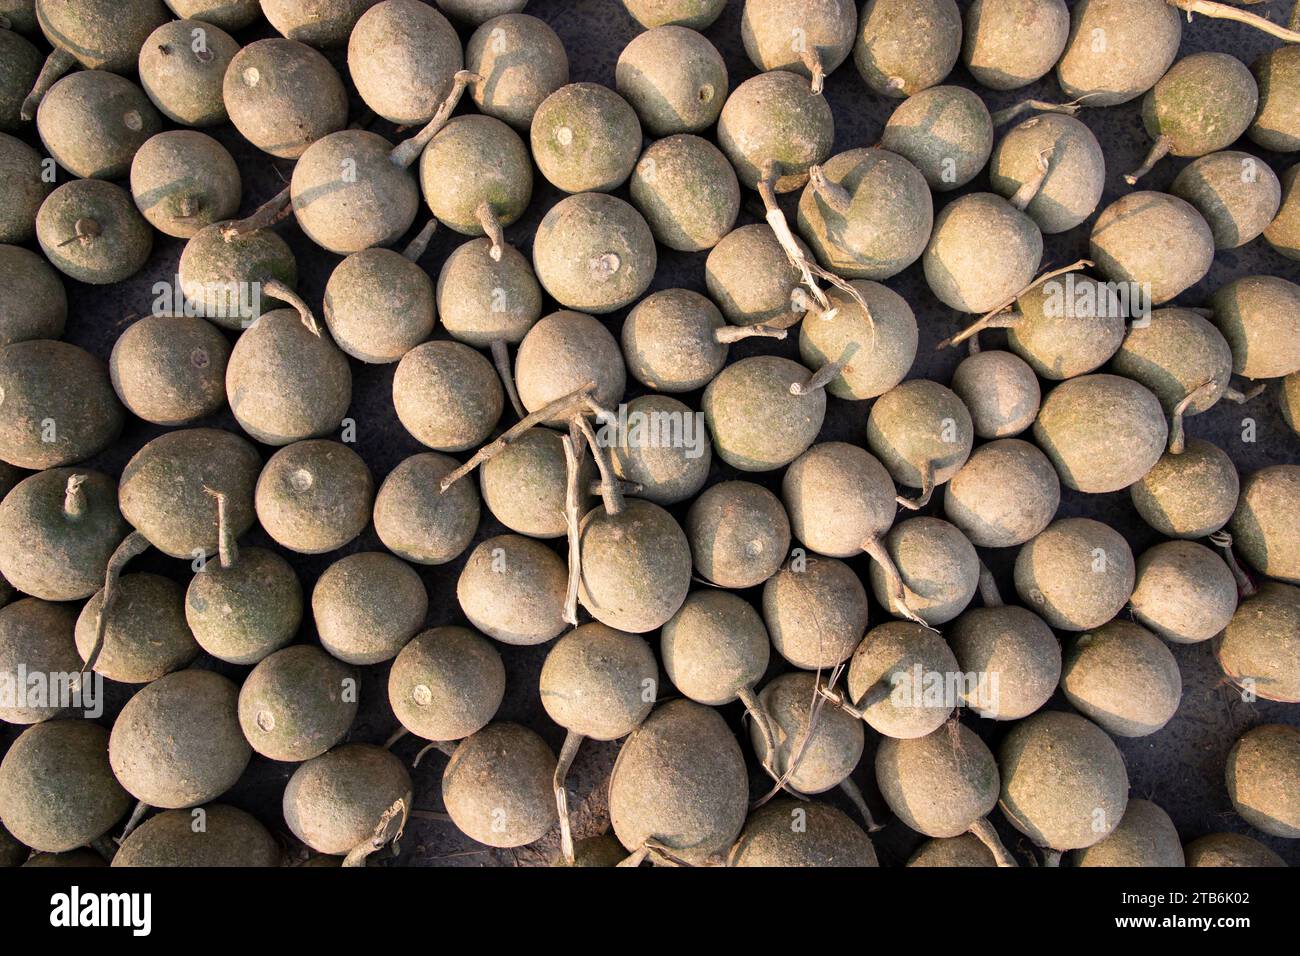 Natural fruits Limonia acidissima Pattern Texture Can be used as a background wallpaper Stock Photo